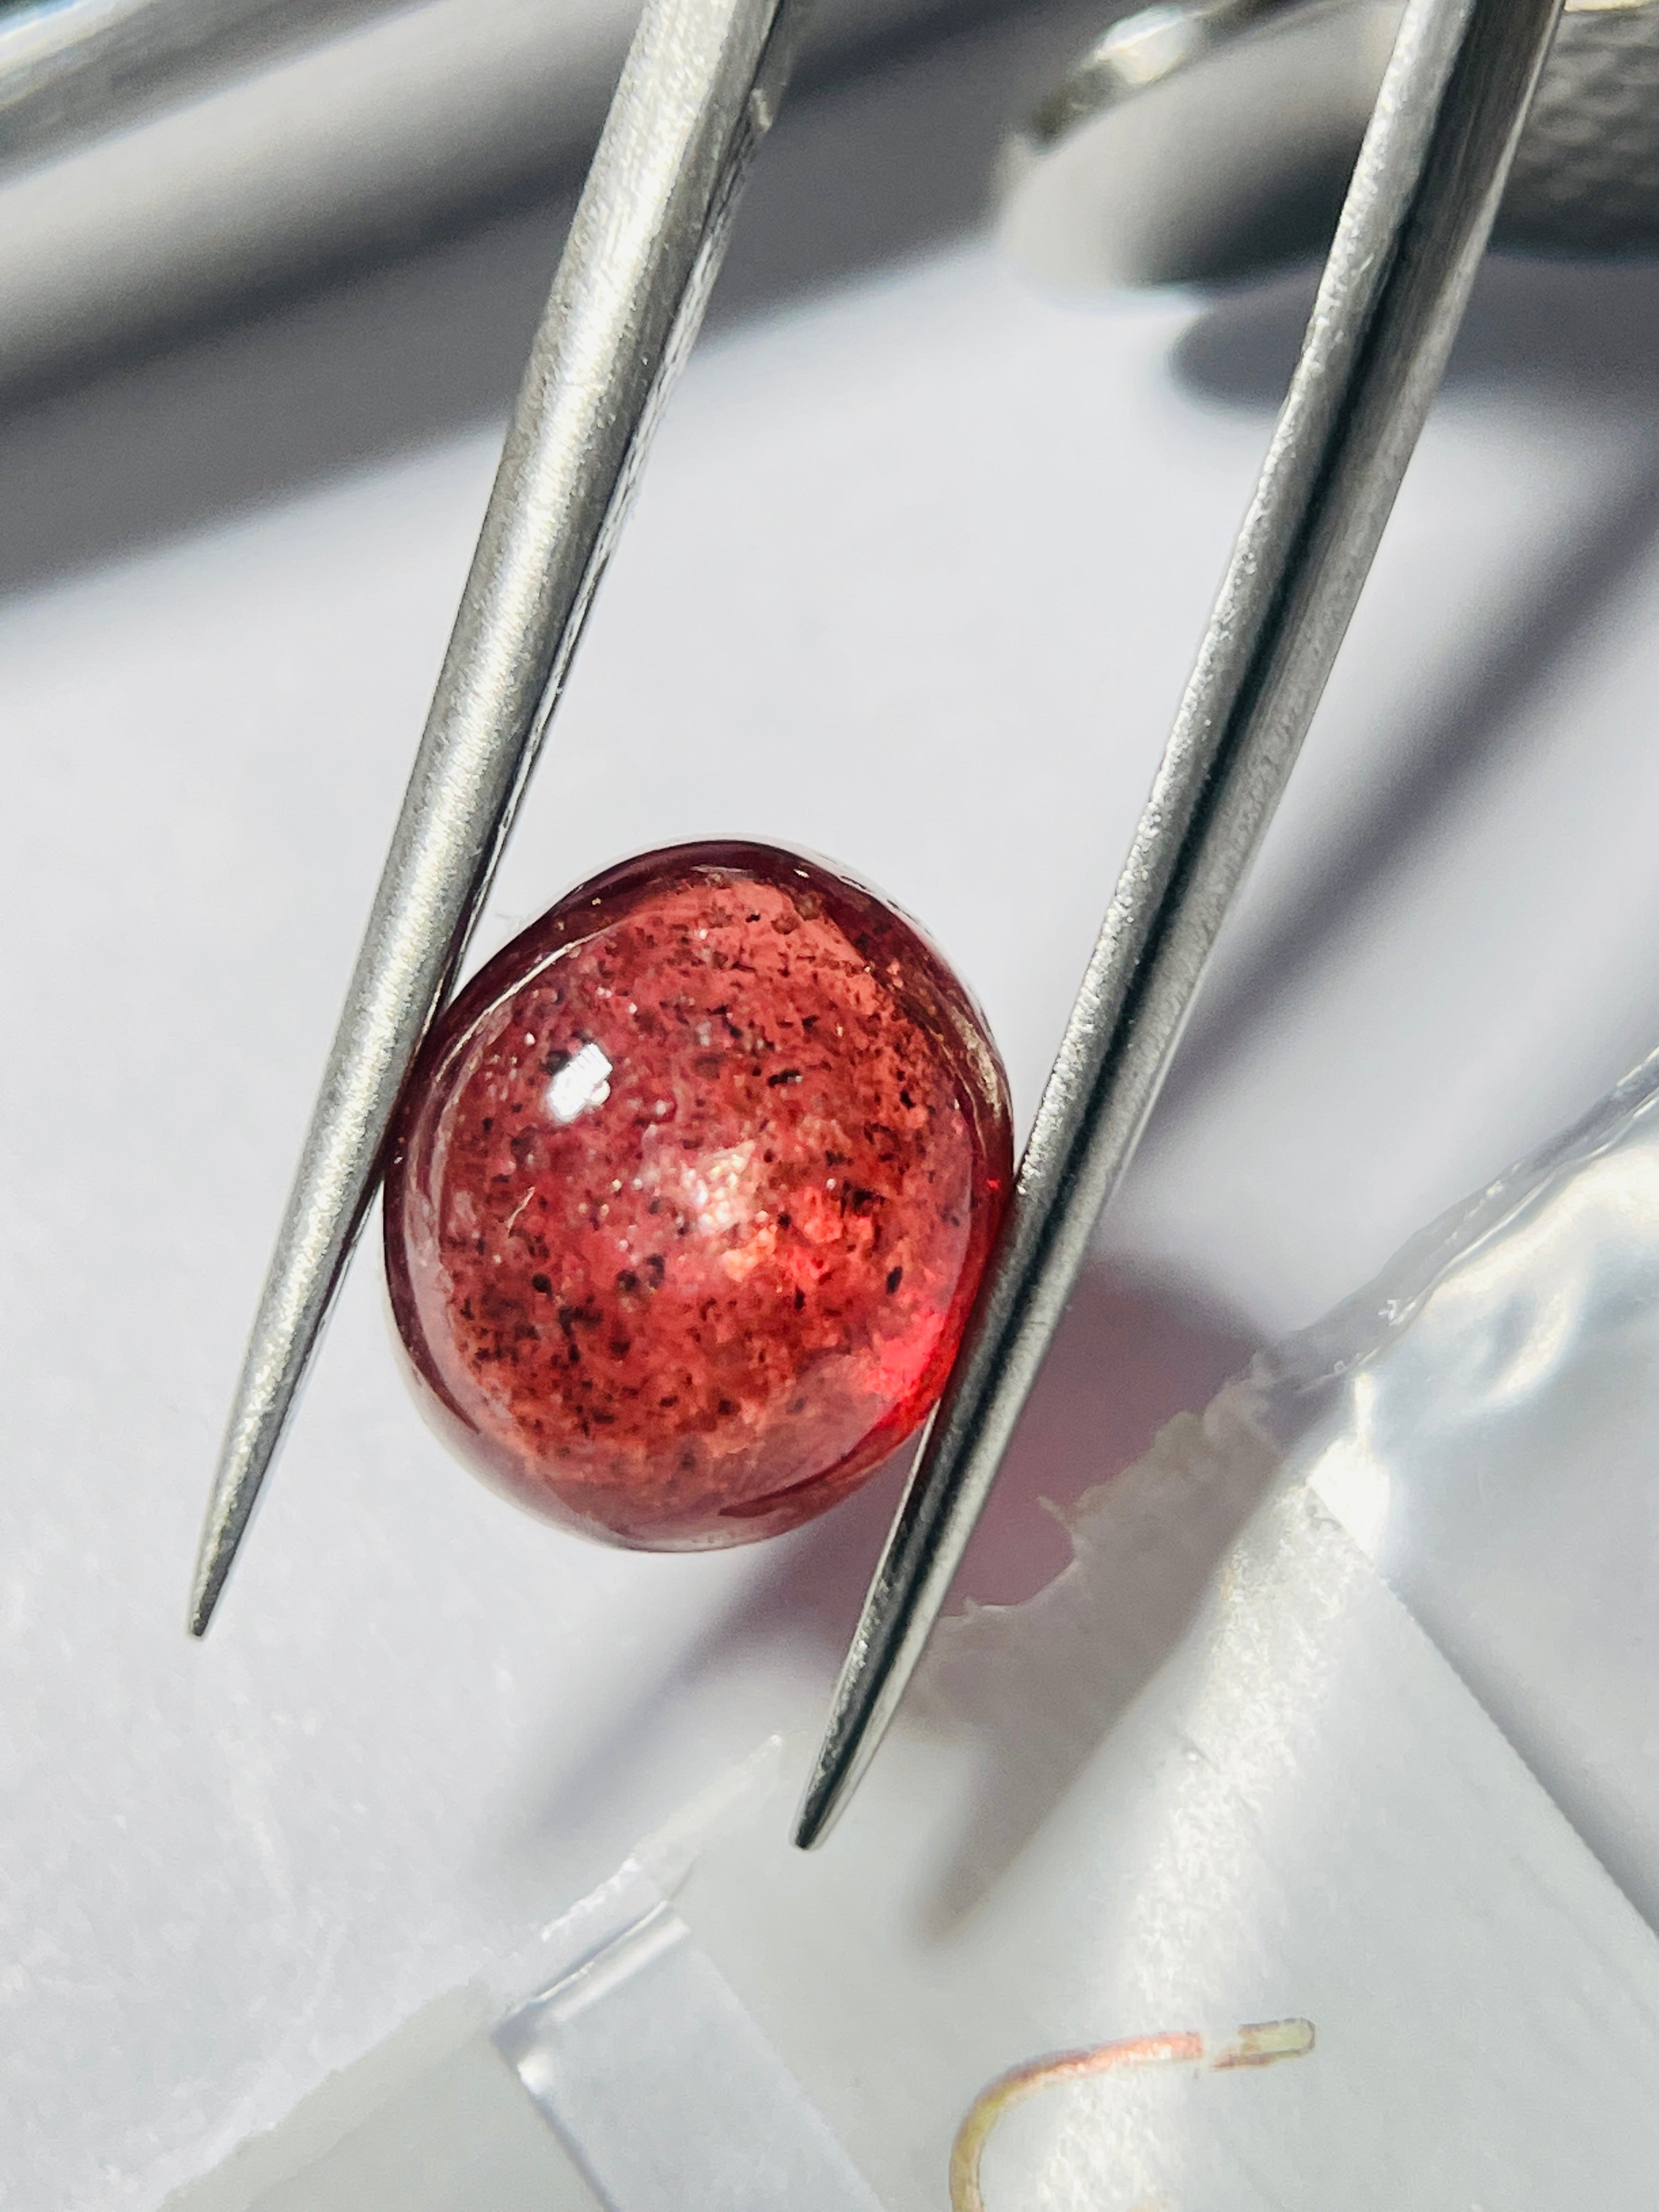 4.08Ct Red Sapphire Cabochon Umba Valley Tanzania. Untreated Unheated. Has A Moving Star But As